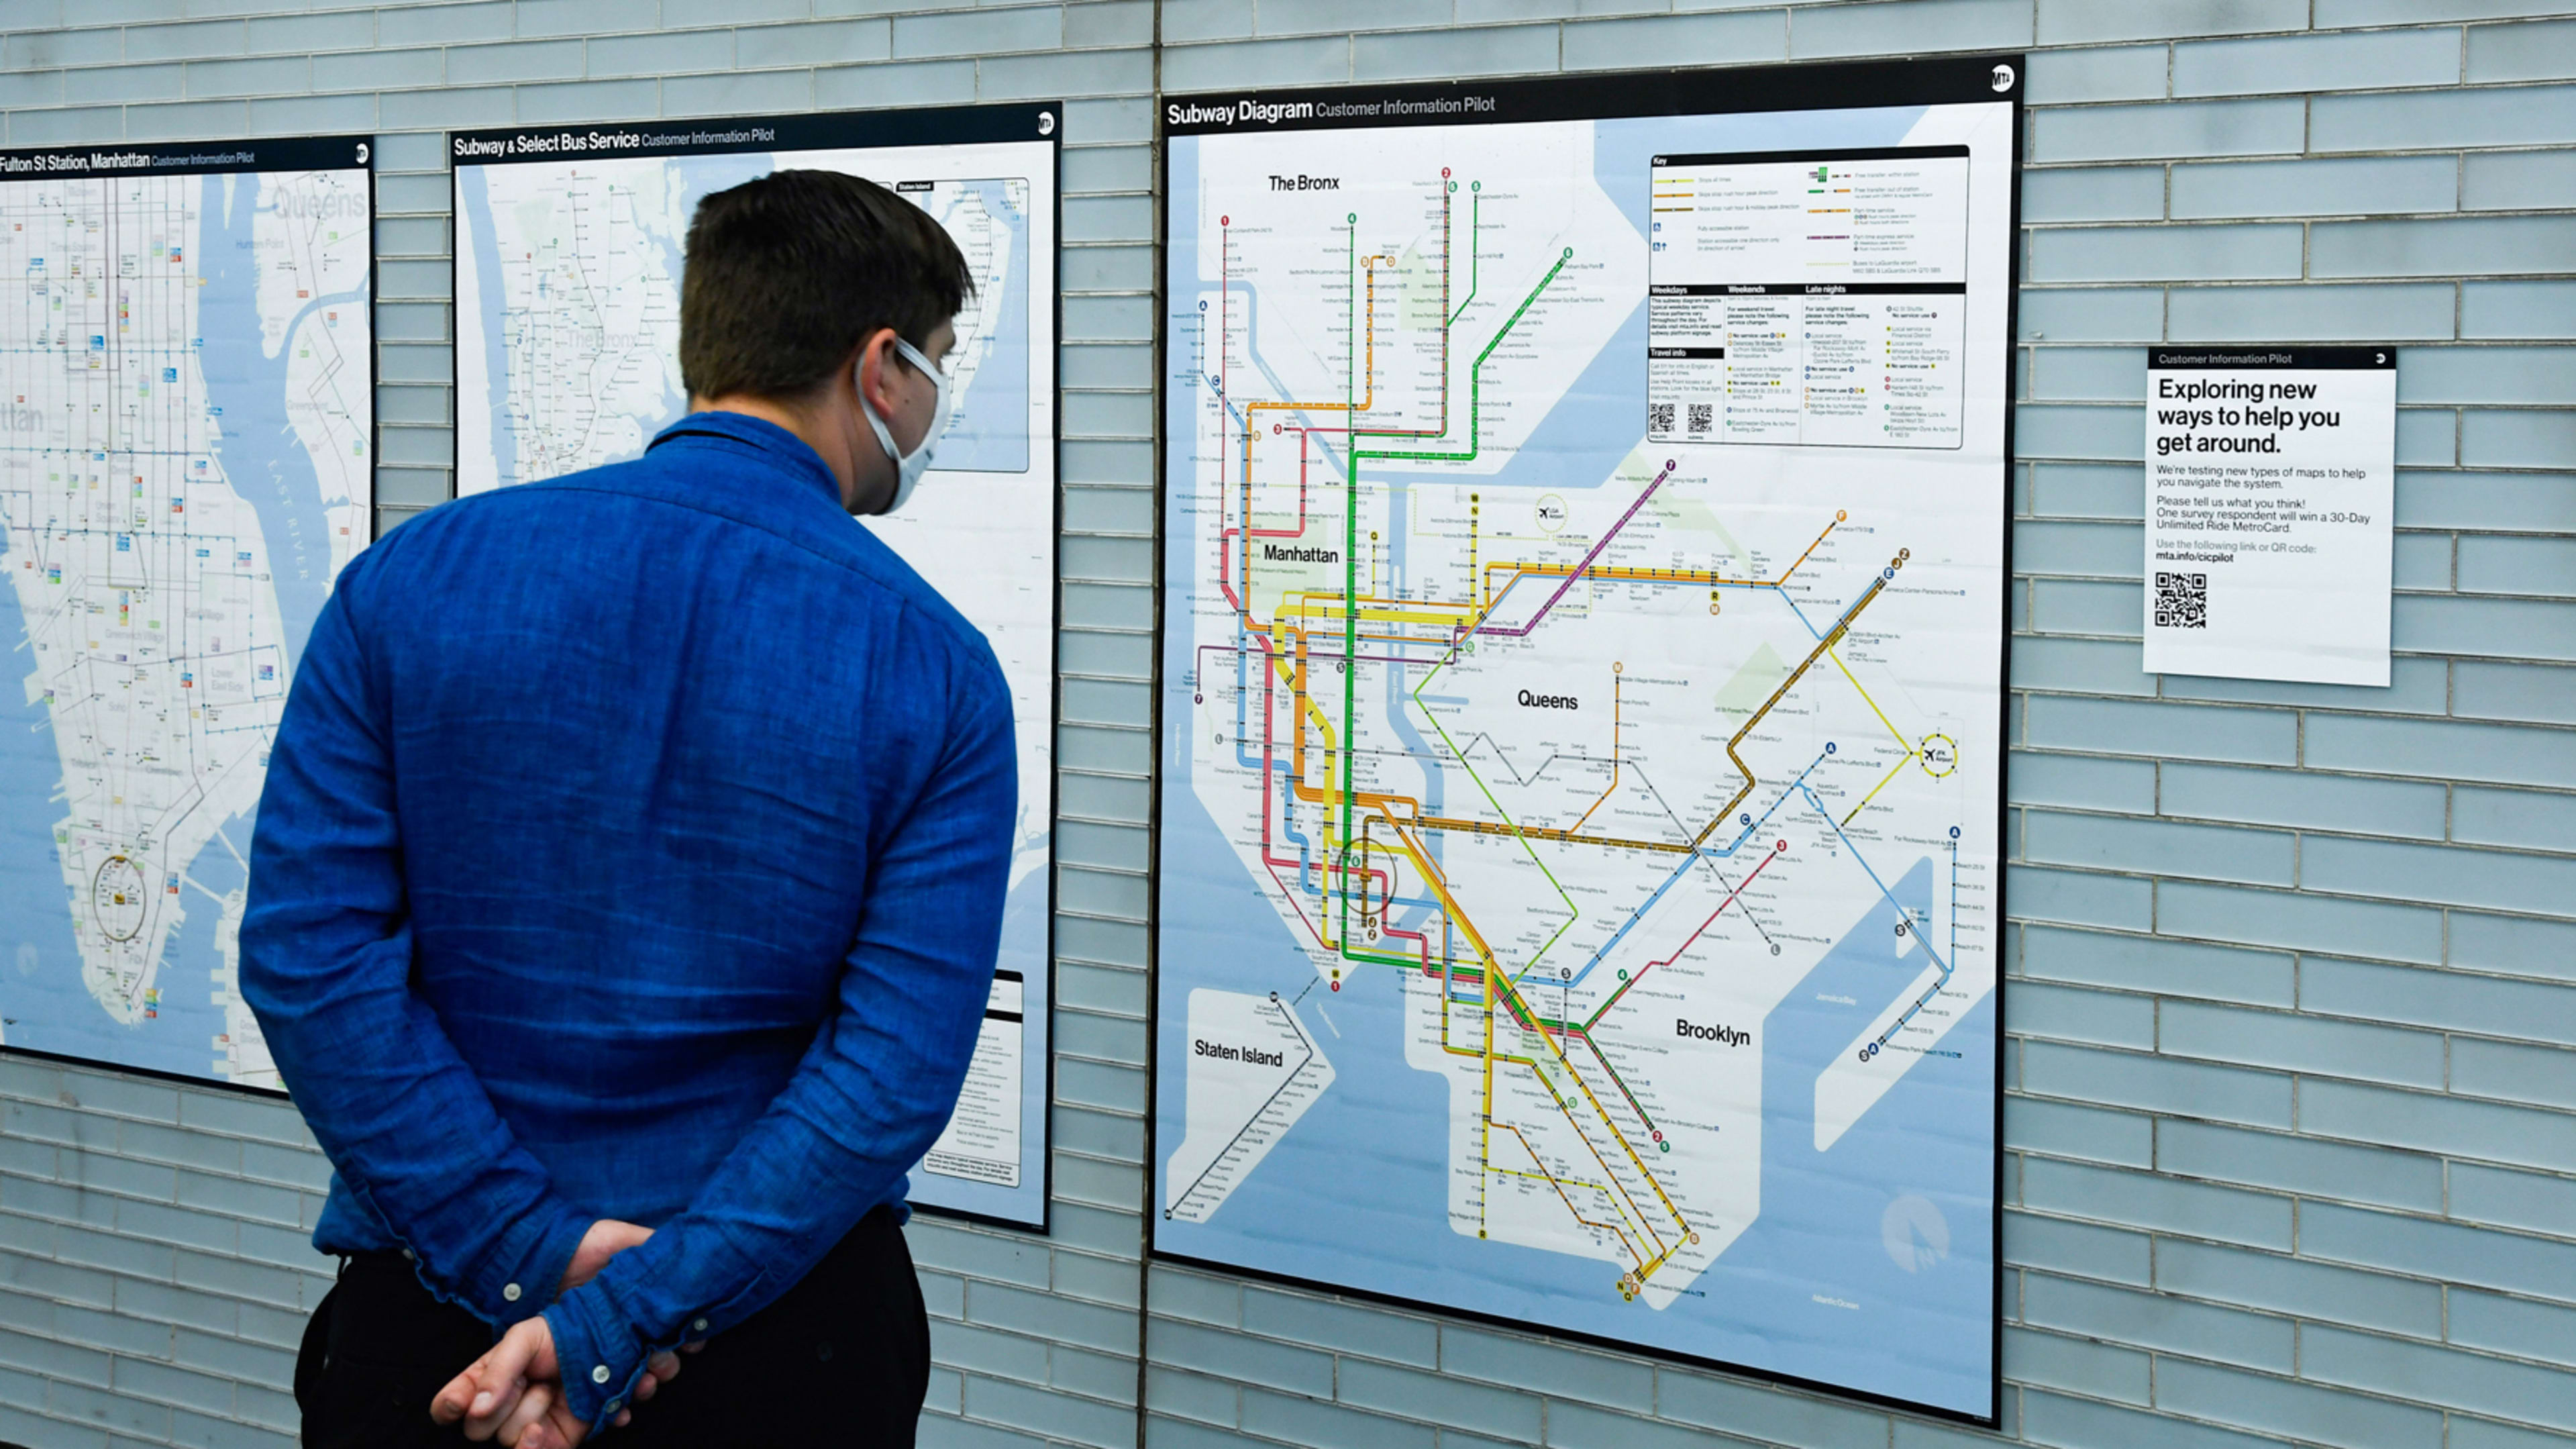 See NYC’s bold new subway map, inspired by Massimo Vignelli’s 1972 classic